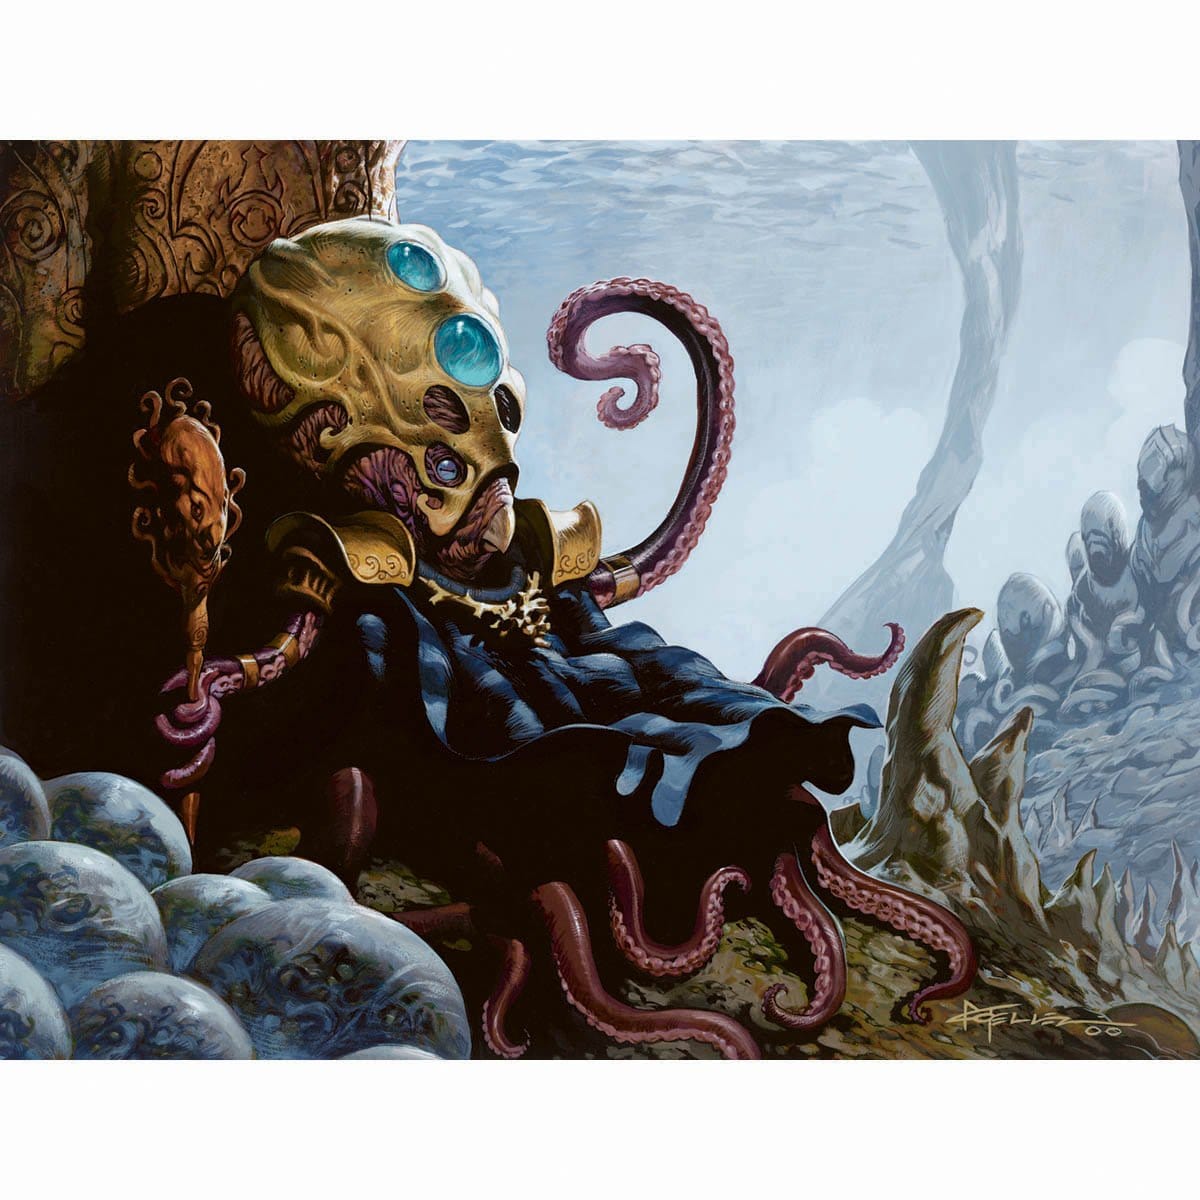 Aboshan, Cephalid Emporer Print - Print - Original Magic Art - Accessories for Magic the Gathering and other card games